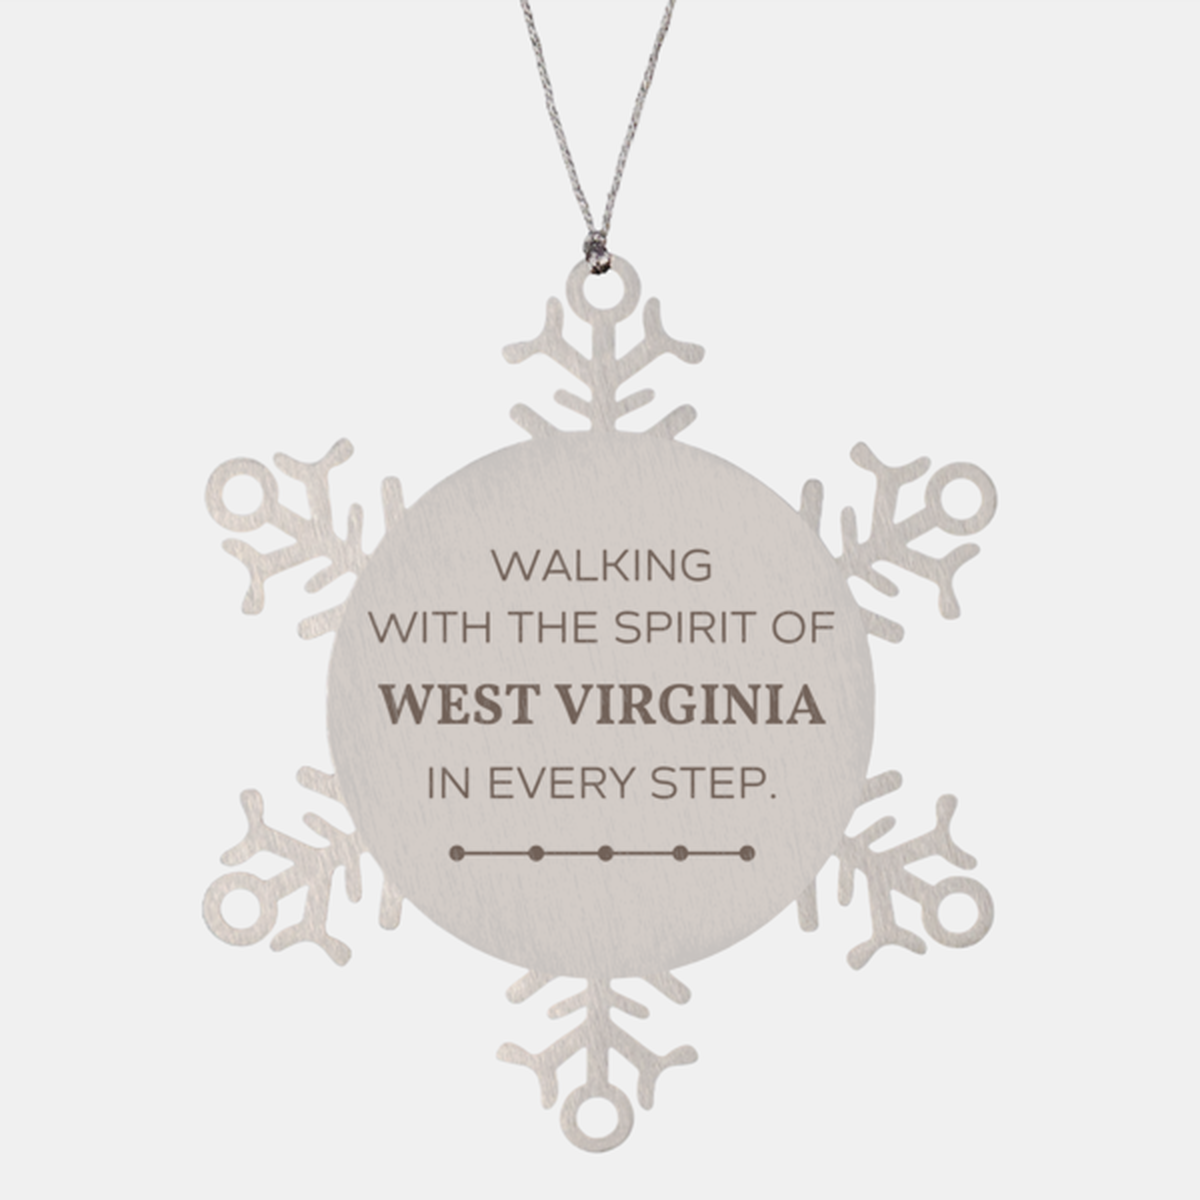 West Virginia Gifts, Walking with the spirit, Love West Virginia Birthday Christmas Snowflake Ornament For West Virginia People, Men, Women, Friends